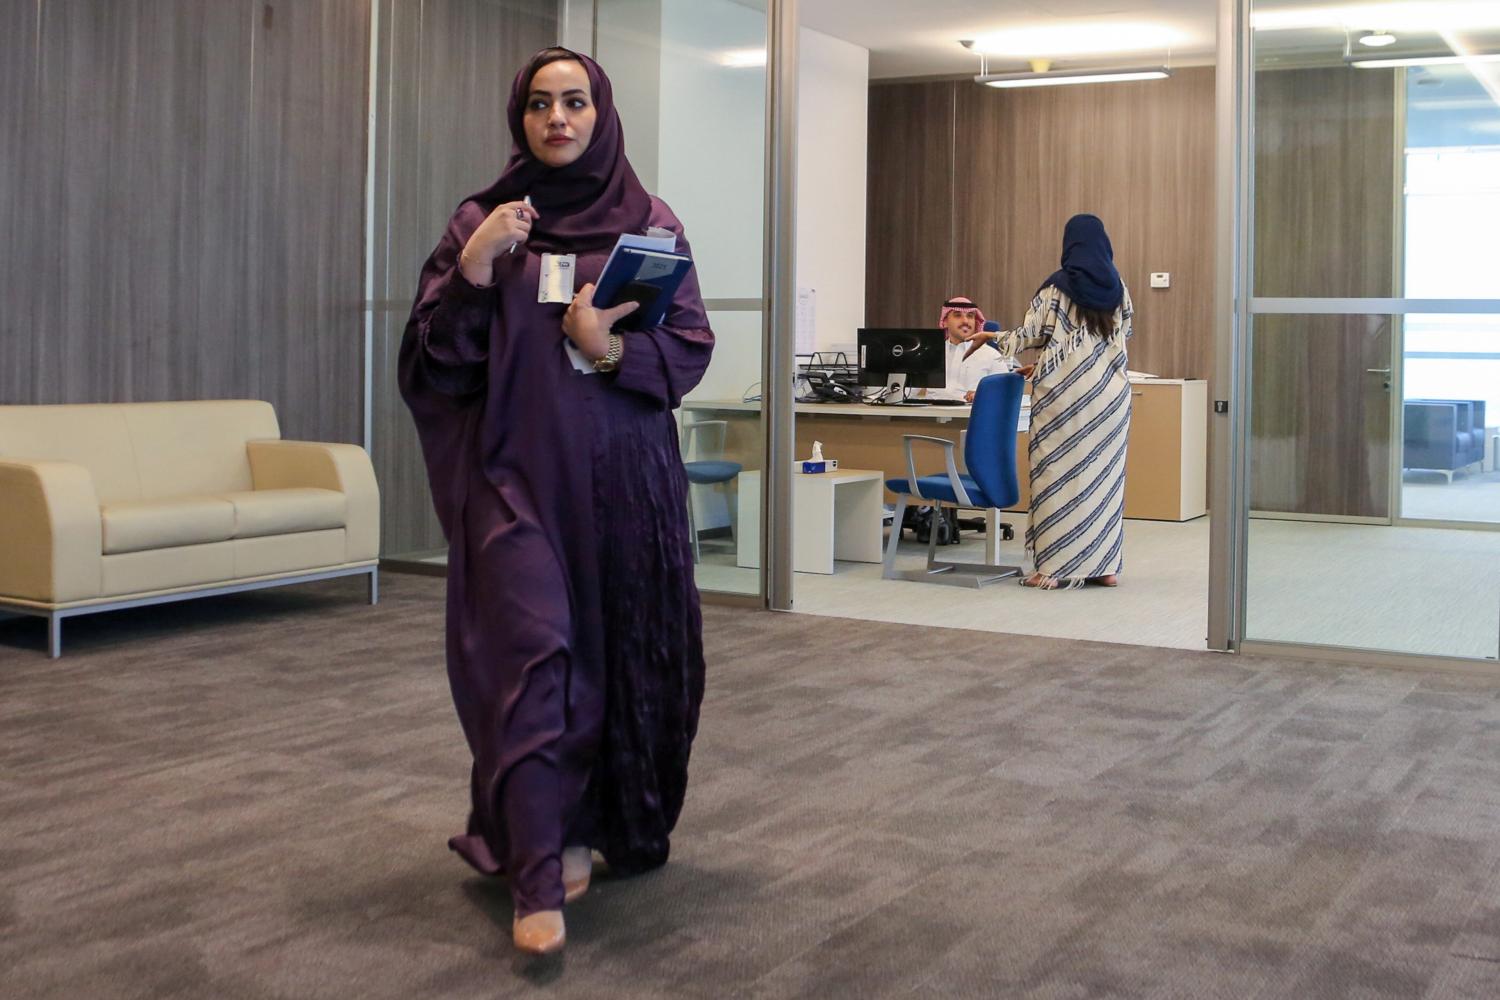 Nouf al-Qahtani, Enablement Programs Manager at Saudi Human Resources Development Fund, walks in the office in Riyadh, Saudi Arabia August 19, 2021. Picture taken August 19, 2021. REUTERS/Ahmed Yosri